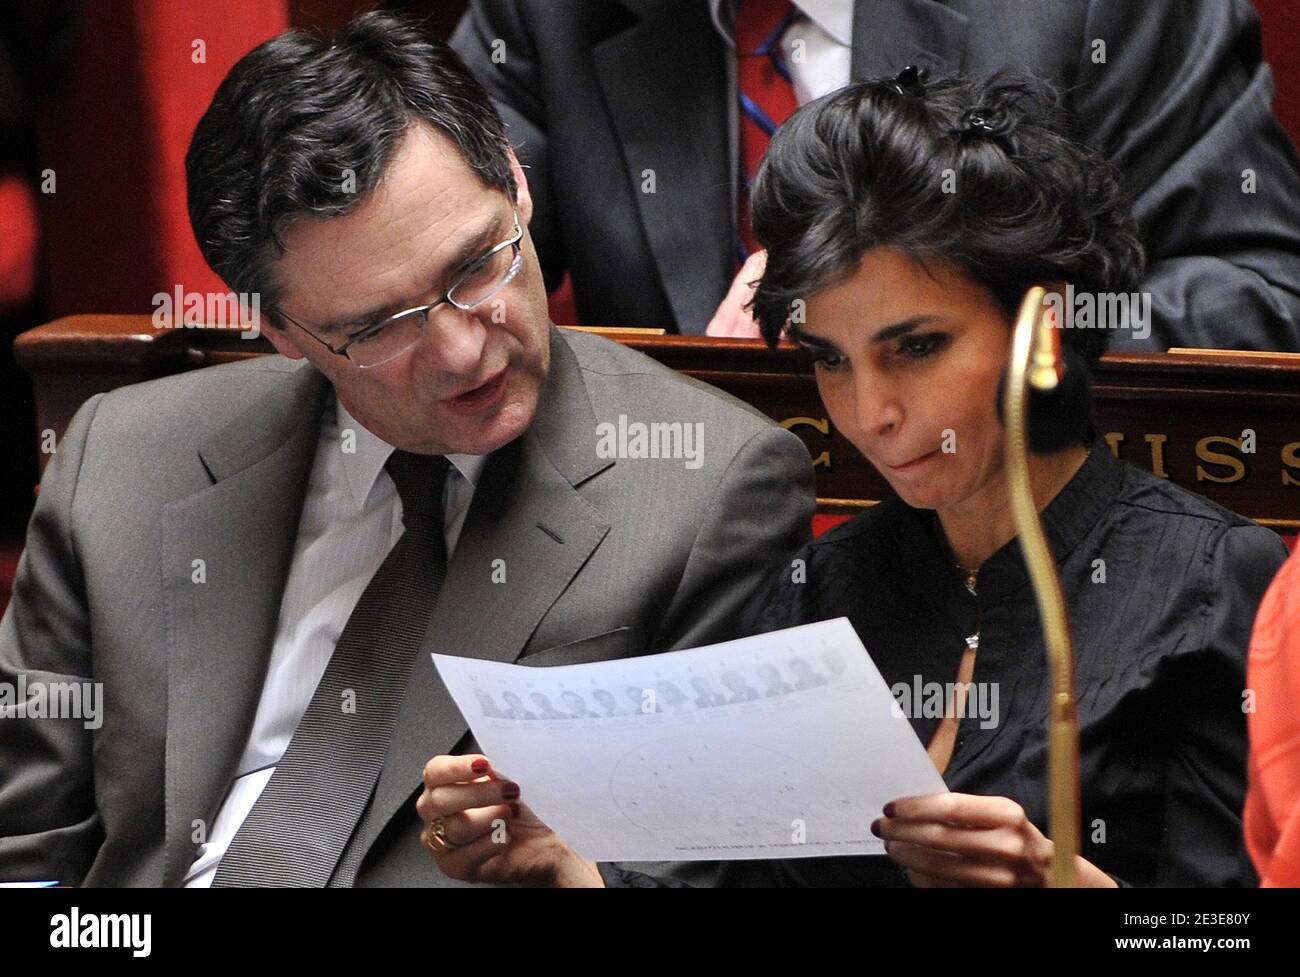 French Justice Minister Rachida Dati and Patrick Devedjian attend a work session at the National Assembly in Paris, France on January 20, 2009. Photo by Christophe Guibbaud/ABACAPRESS.COM Stock Photo